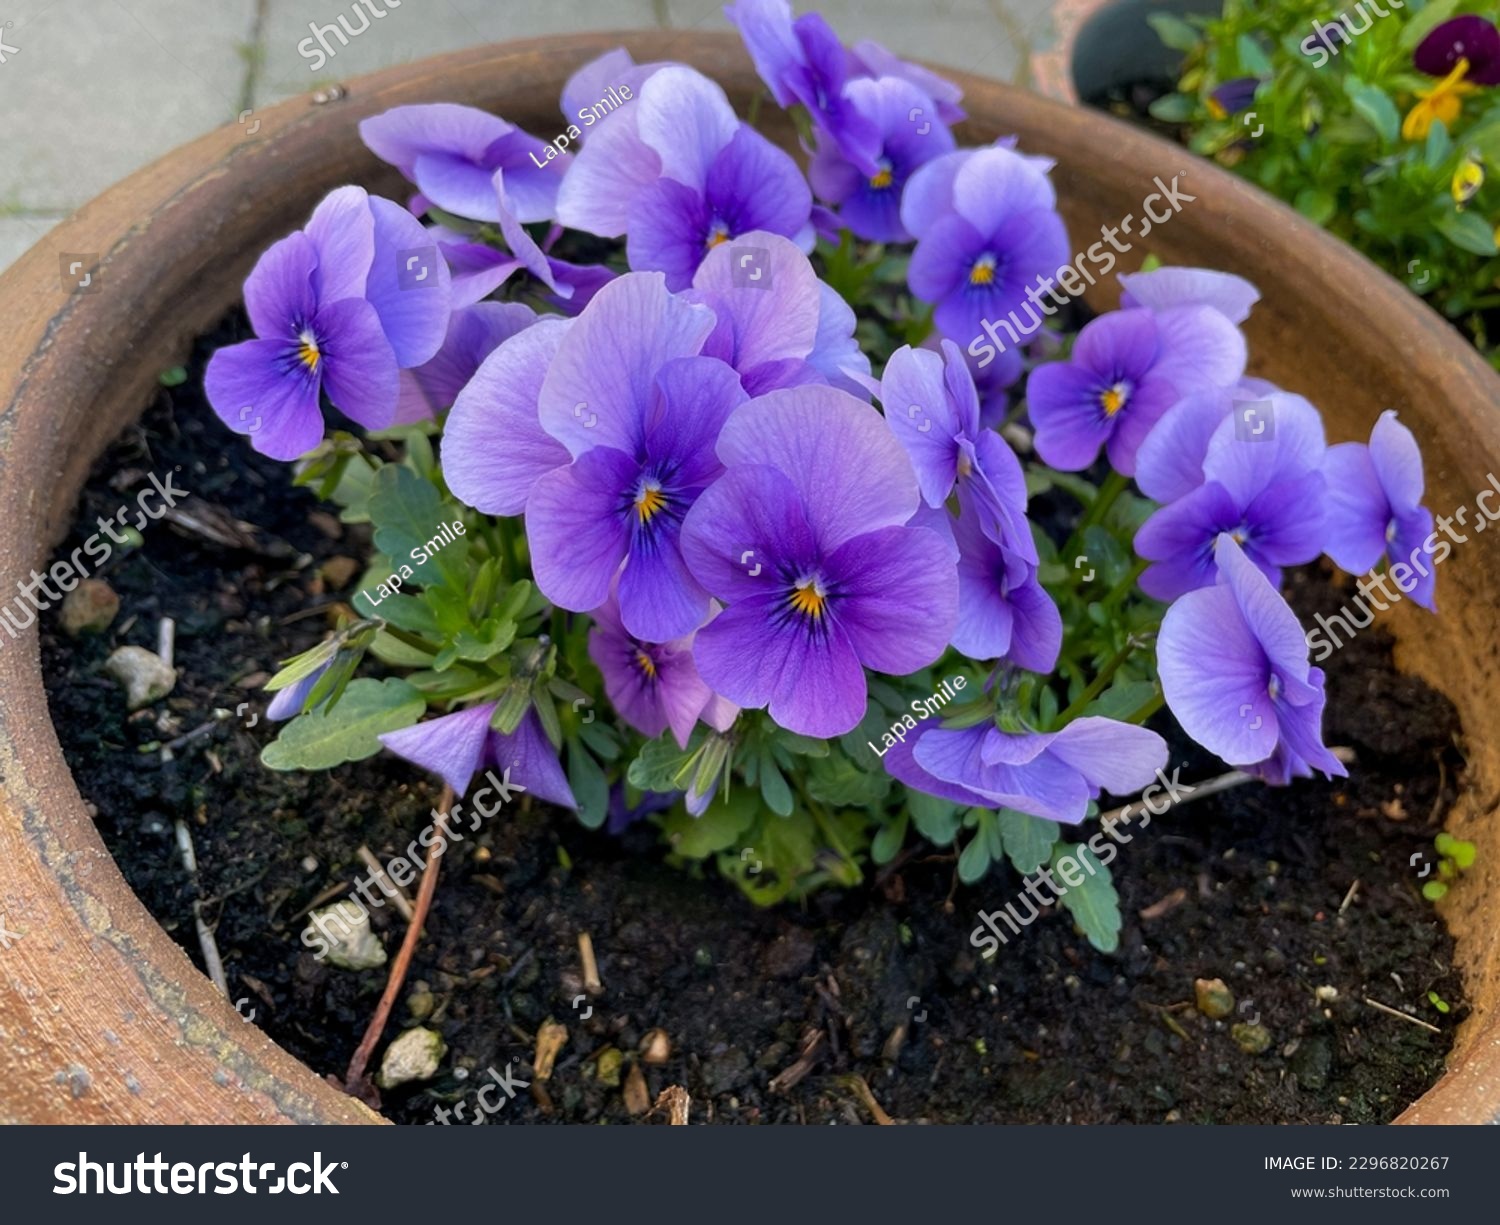 Decorative flower pot with vibrant blue purple Viola Cornuta pansy flowers close up, floral wallpaper background with blooming violet blue pansies #2296820267